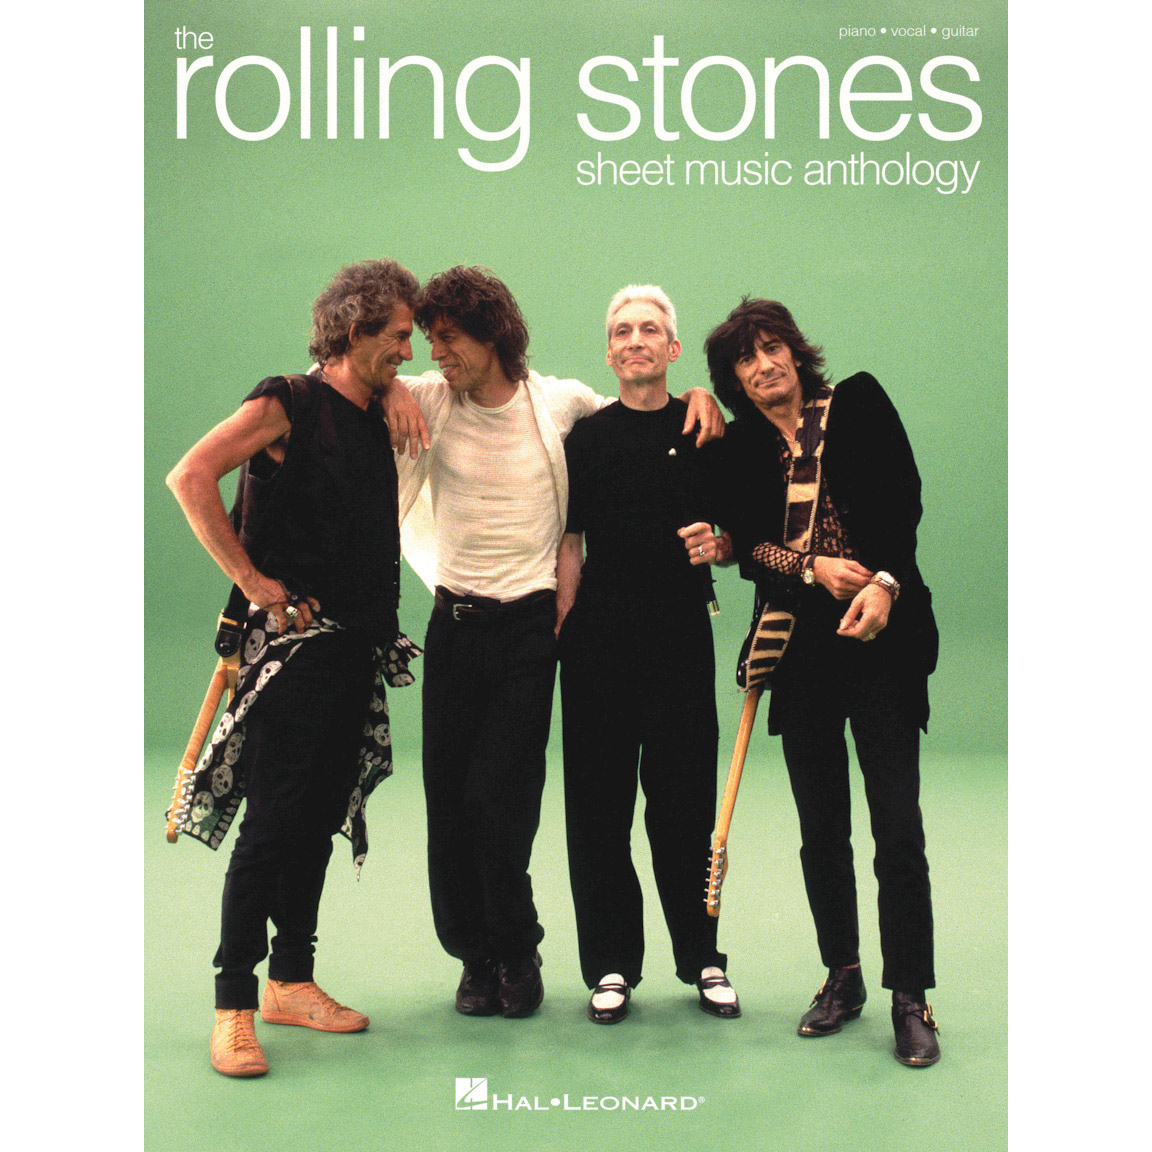 Partitions - The Rolling Stones